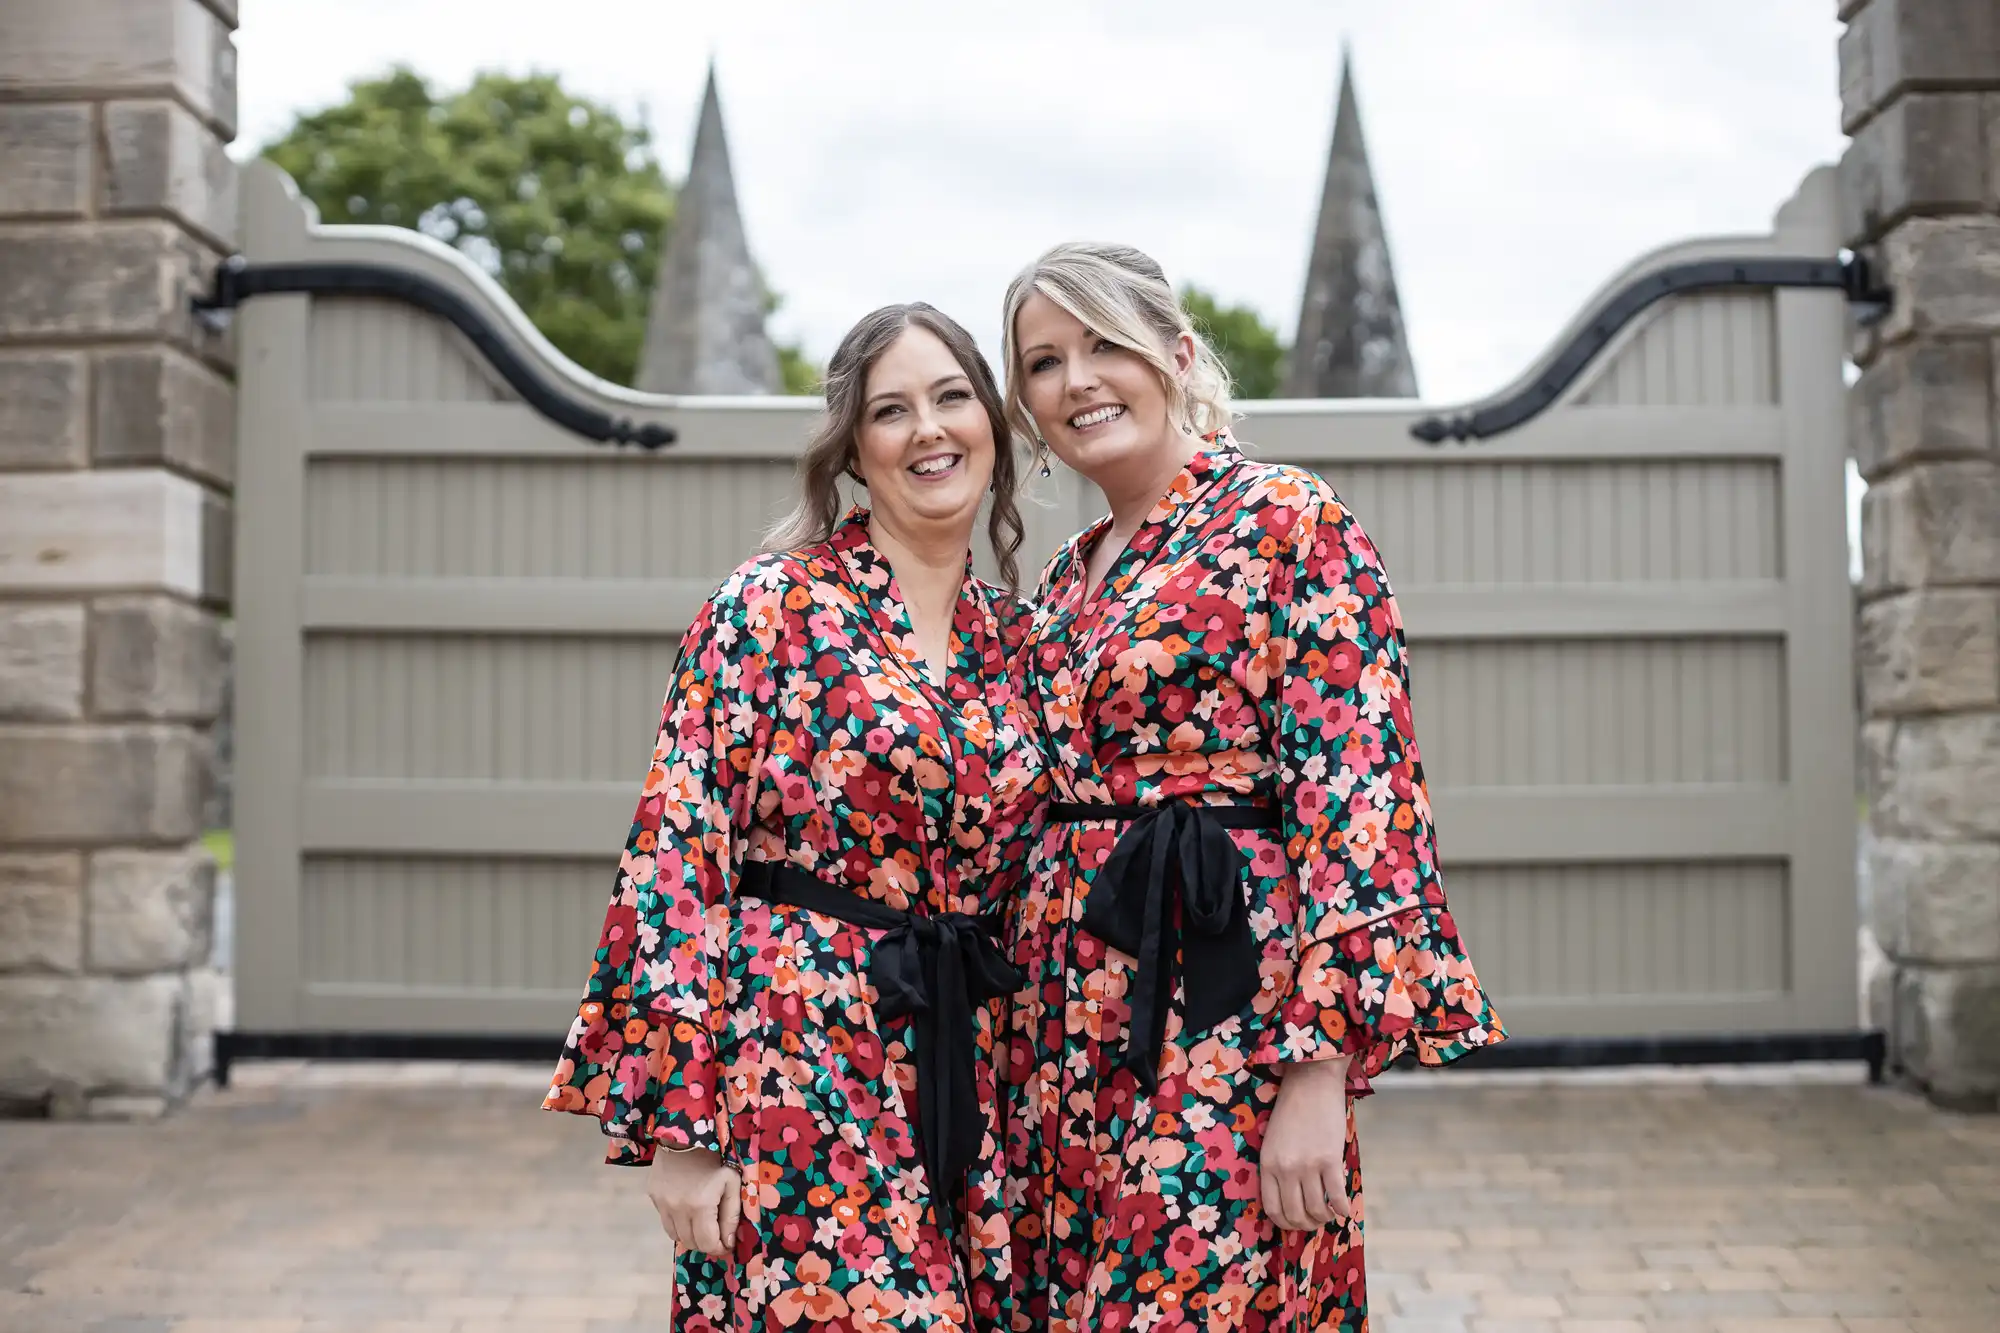 Two women in floral robes smiling and standing arm-in-arm in front of a gate with pointed tops, possibly at a formal event.